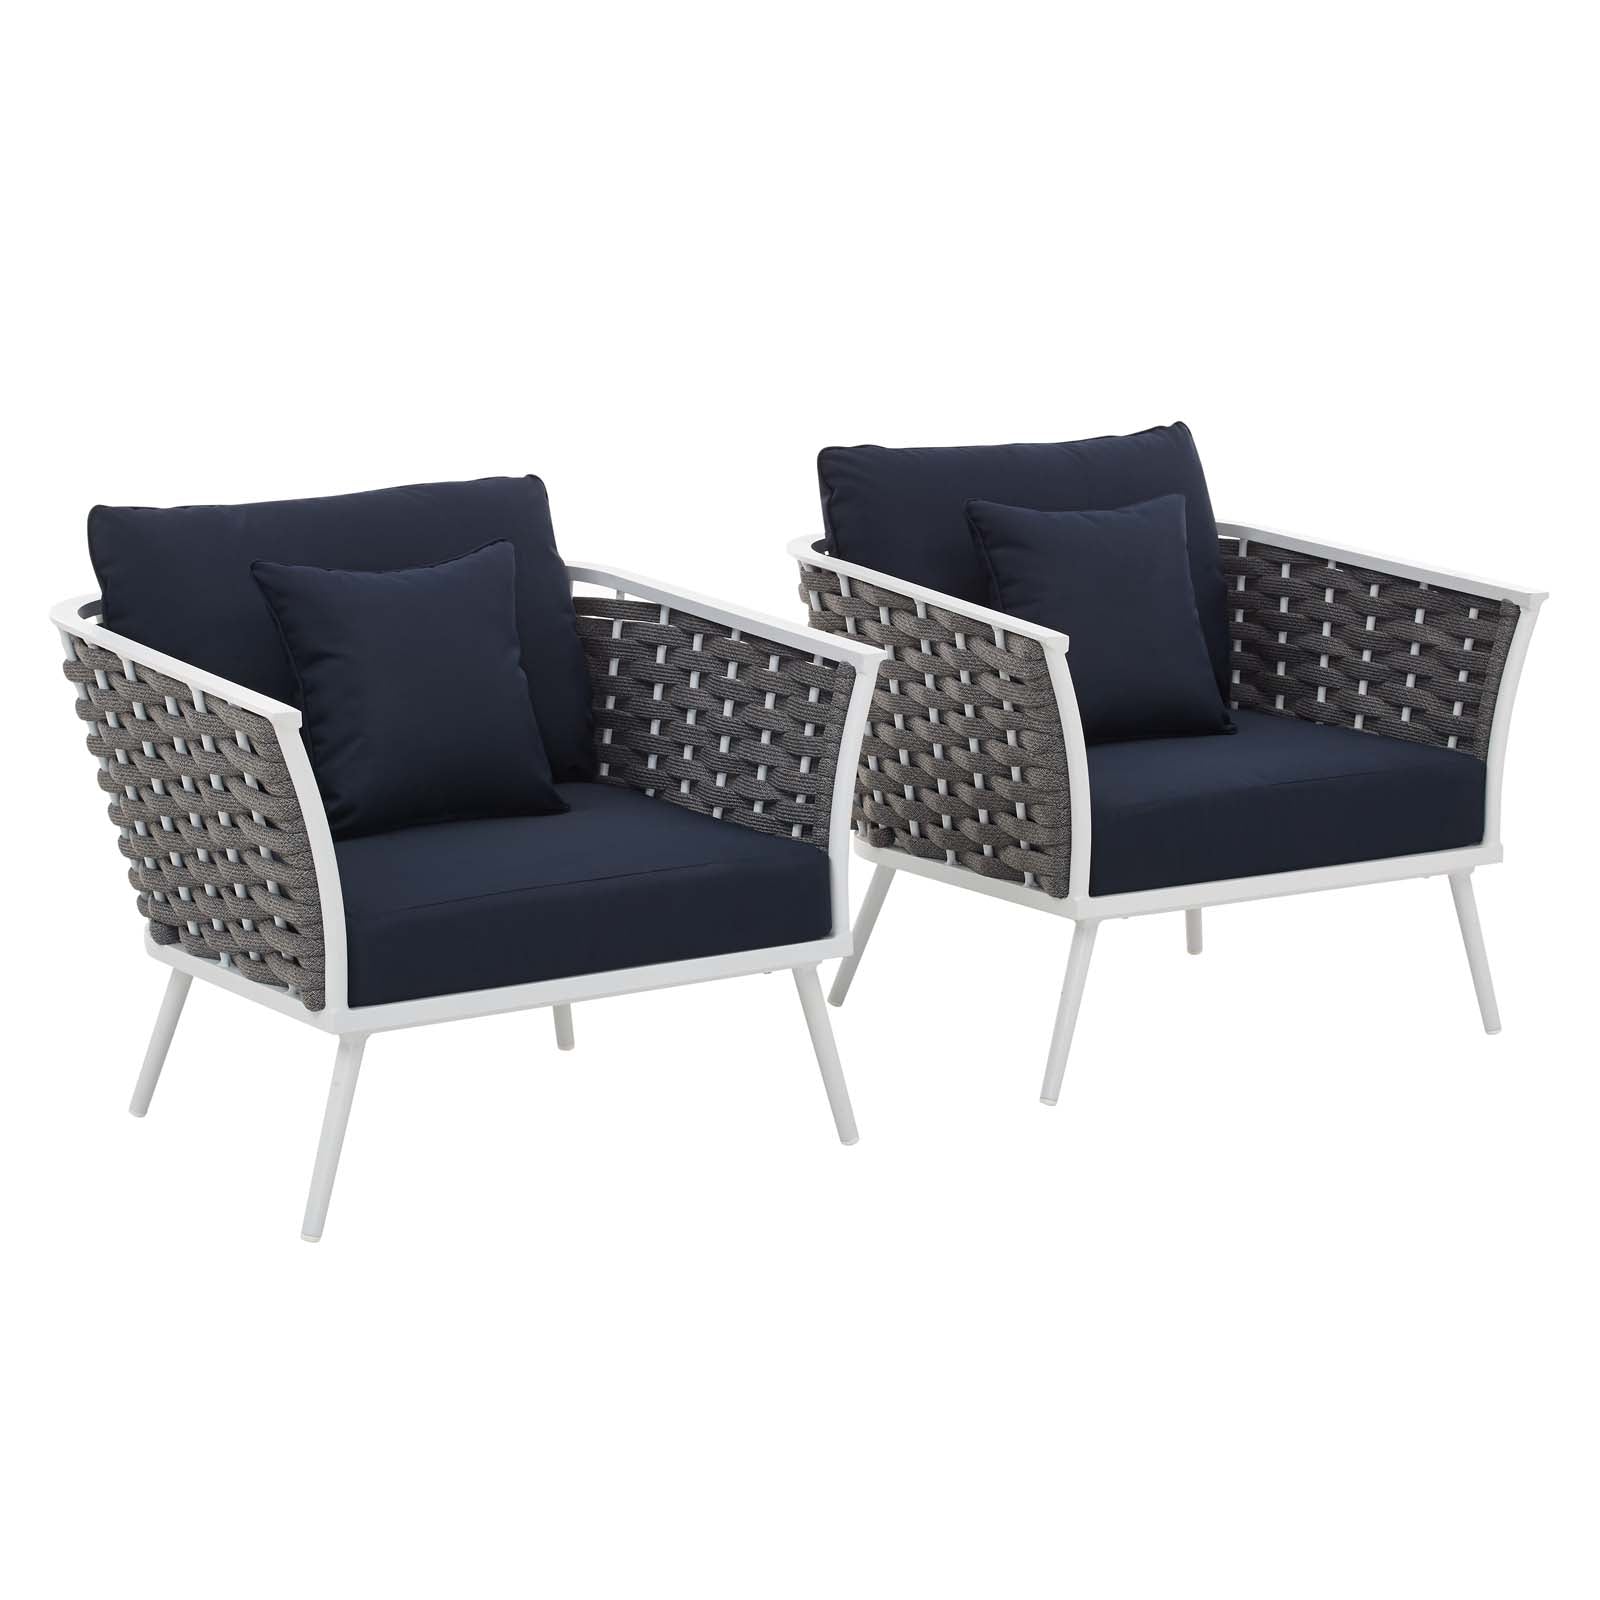 Stance Armchair Outdoor Patio Set White & Navy (Set of 2)